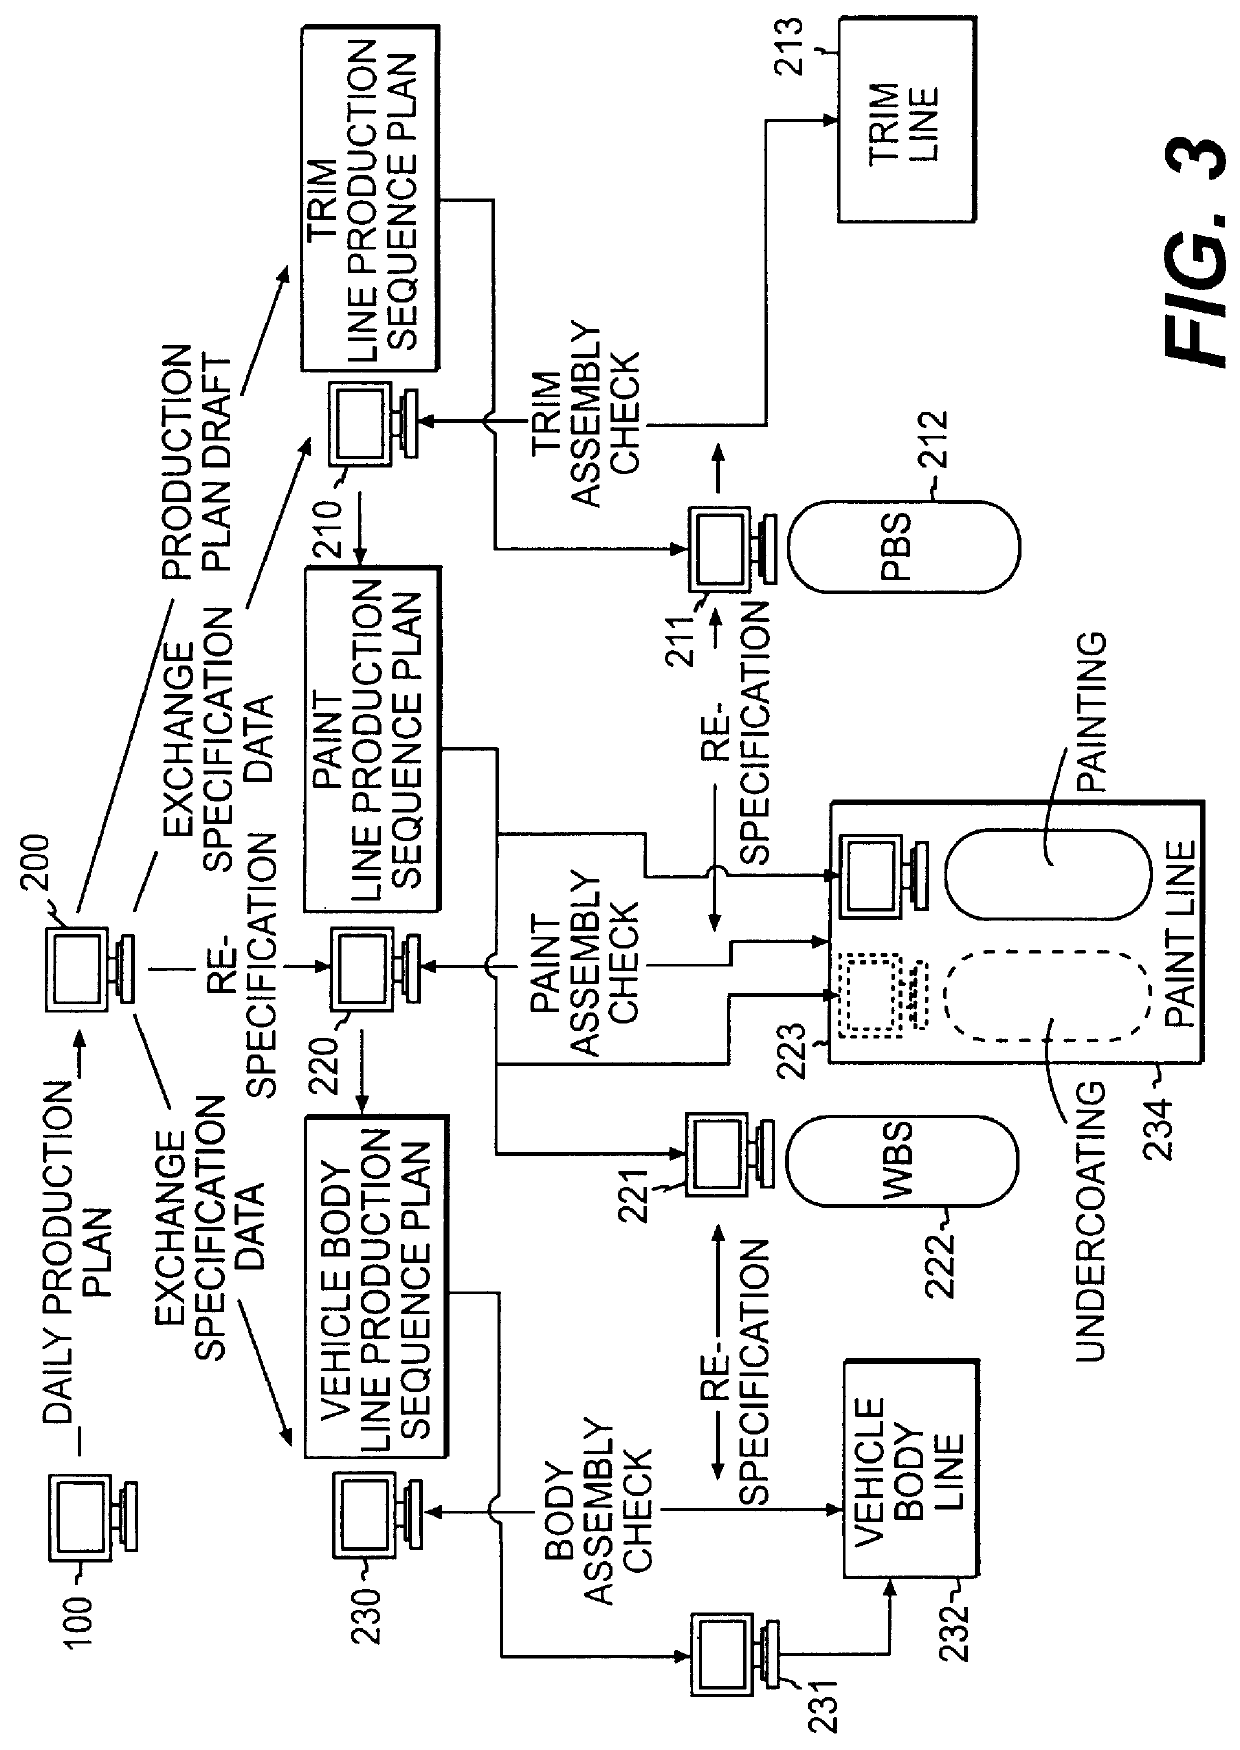 Vehicle assembly line control system and method